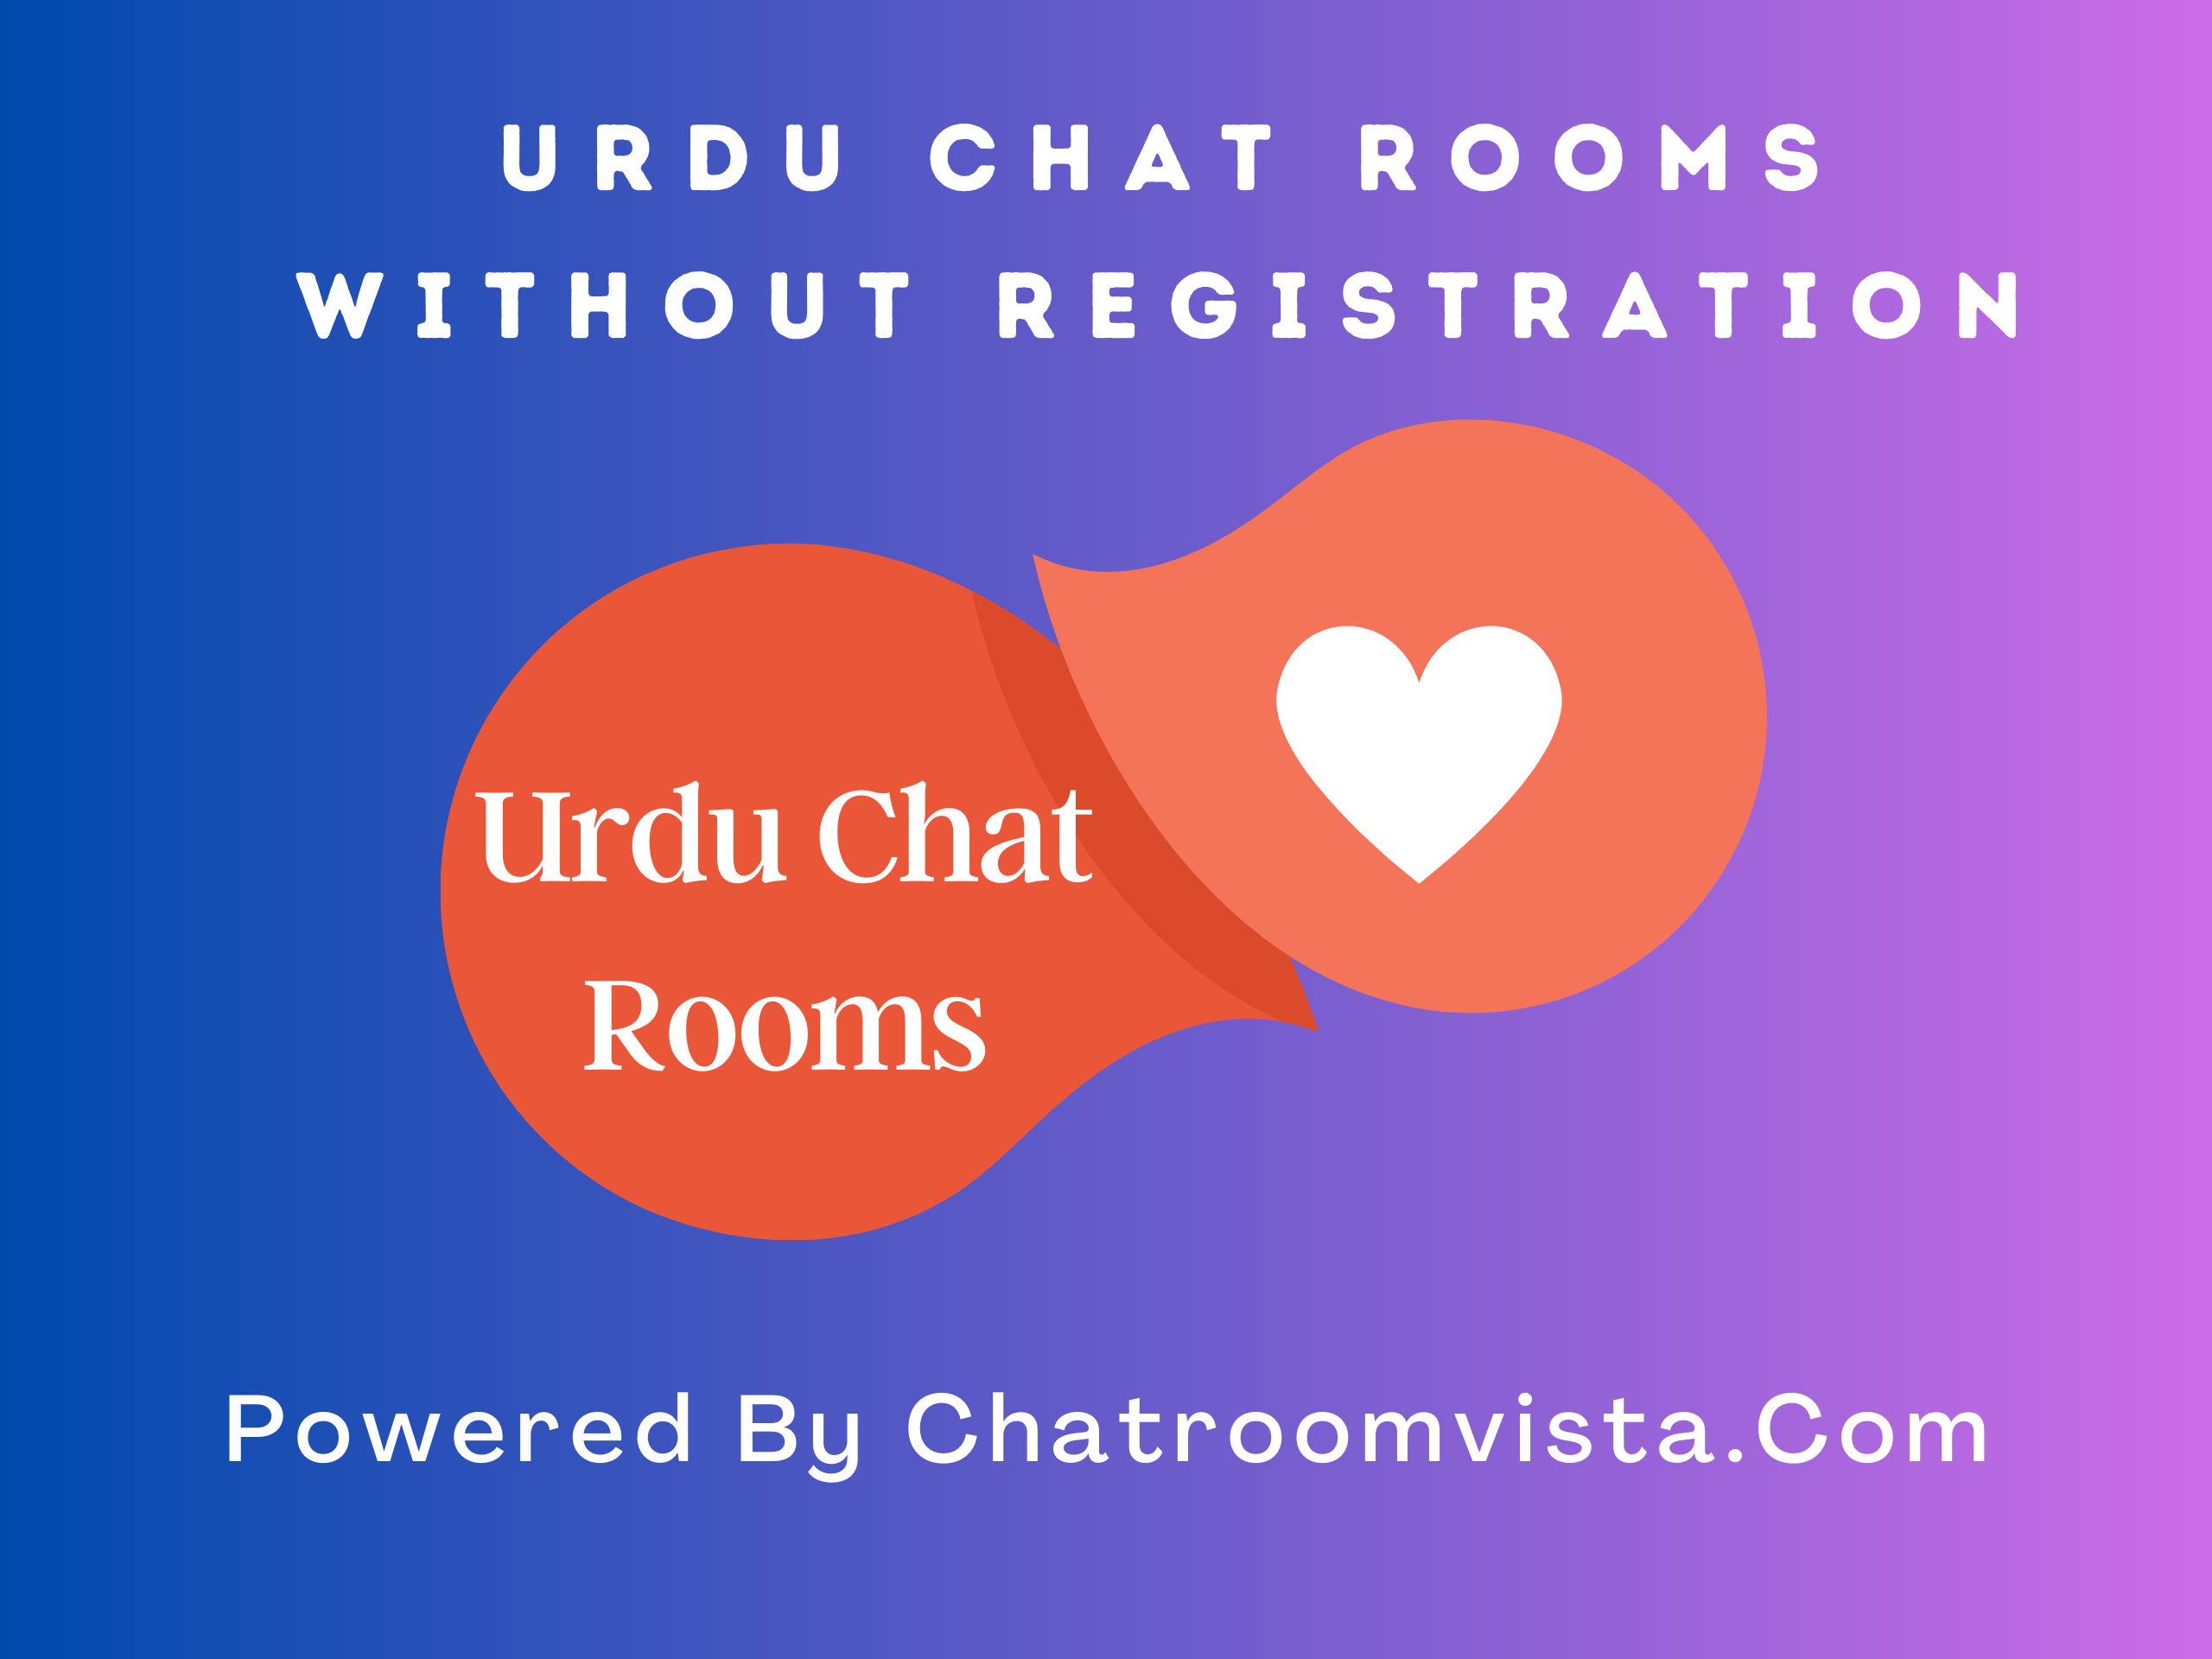 Urdu Chat Rooms Without Registration